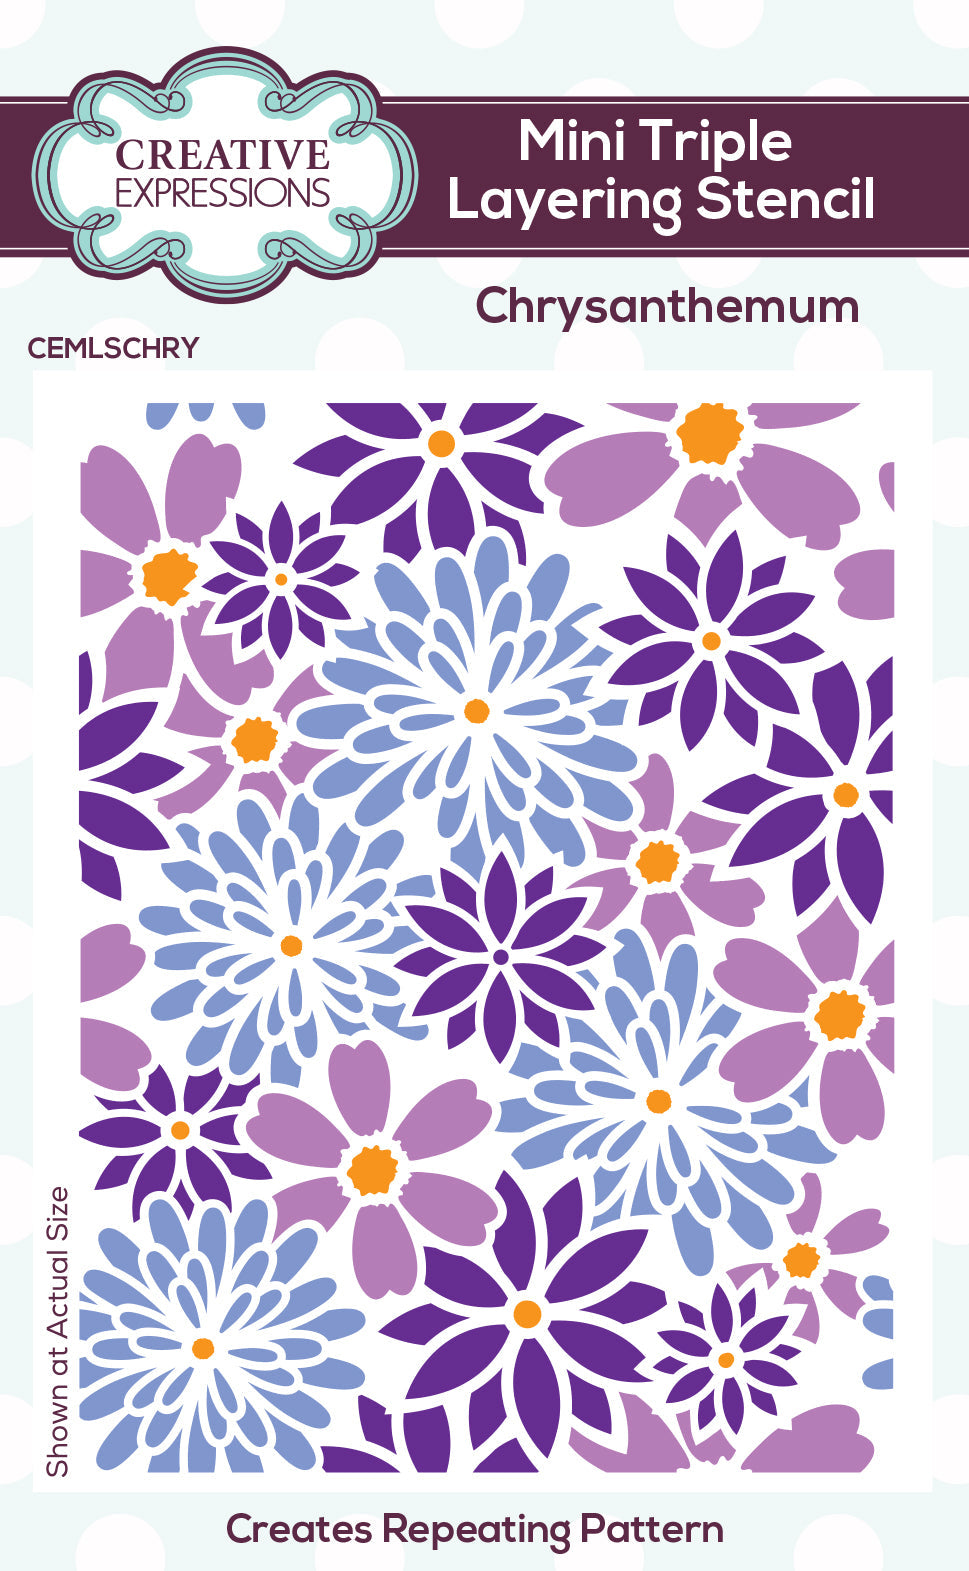 Creative Expressions Chrysanthemum Mini Triple Layering Stencil 4 in x 3 in Set of 3